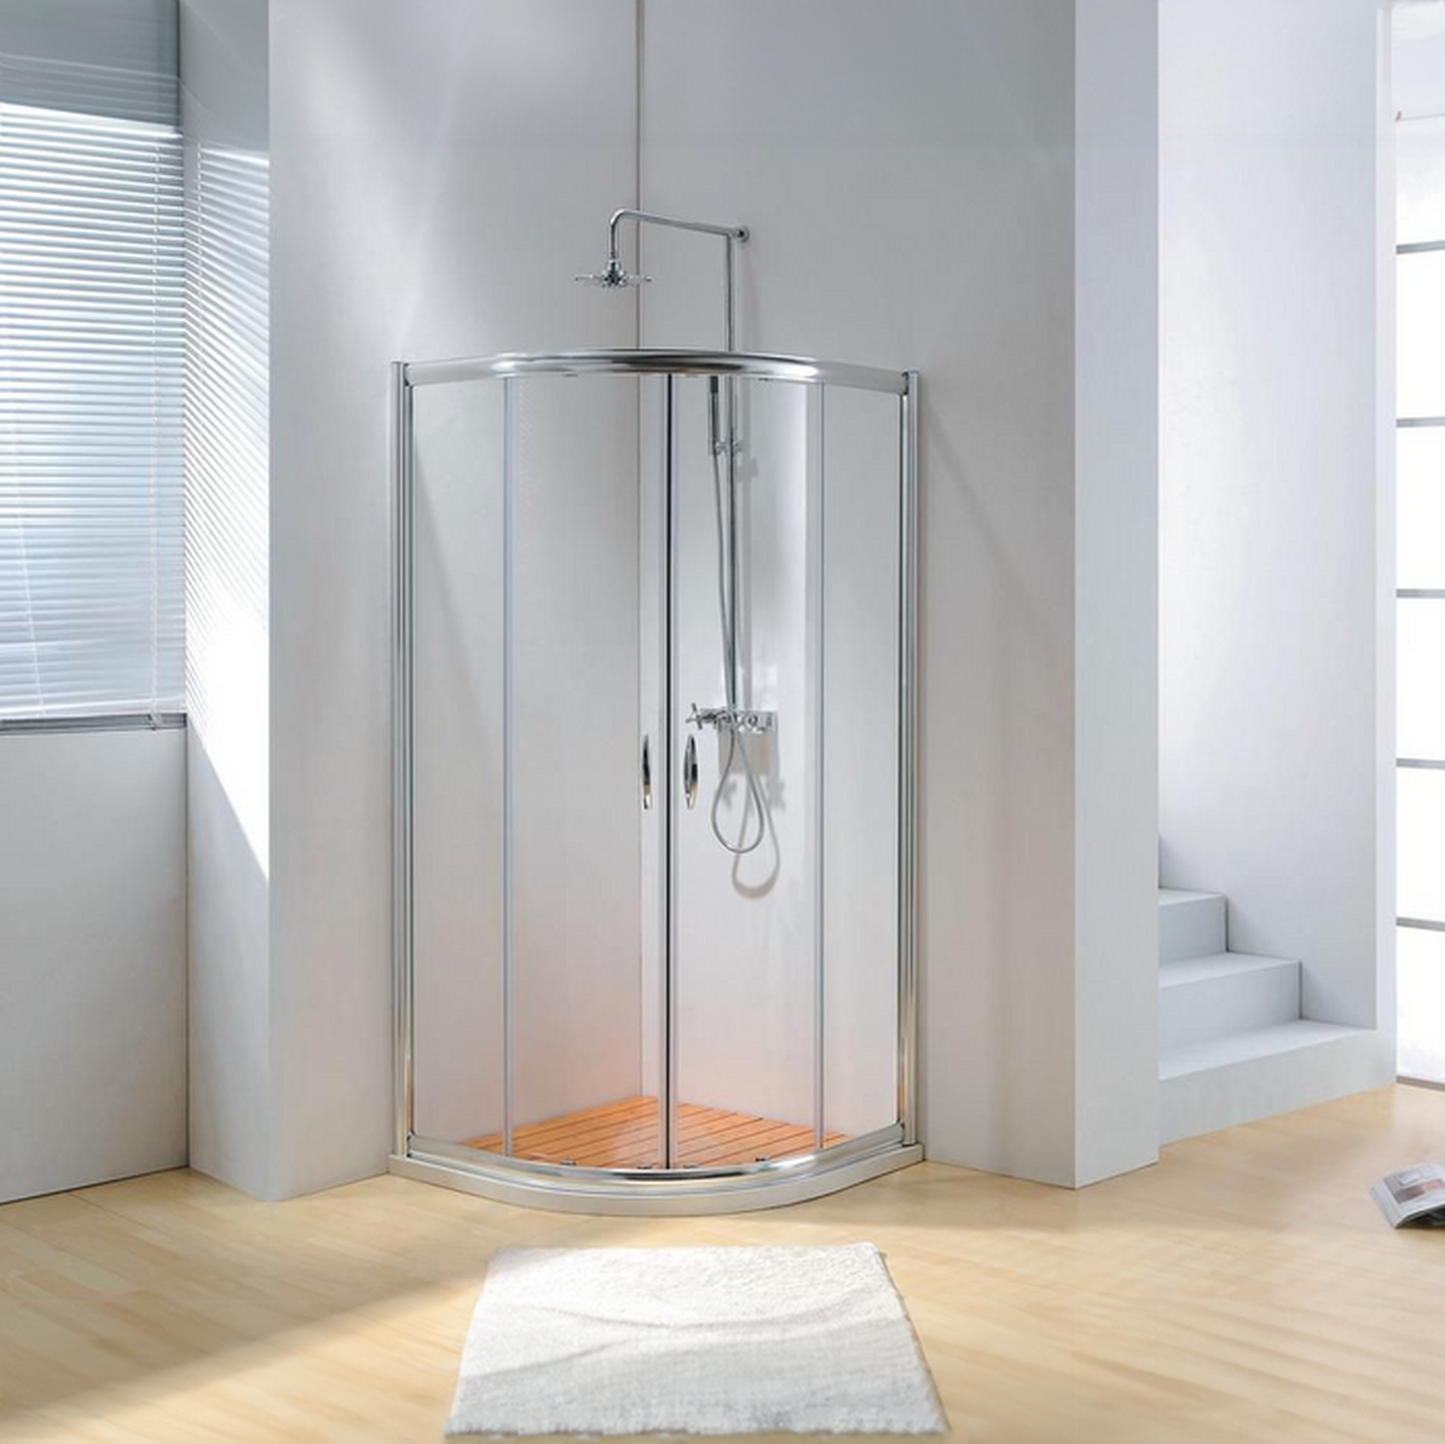 Dreamwerks 40" x 79" Clear Glass Framed Sliding Shower Enclosure With Chrome Handle